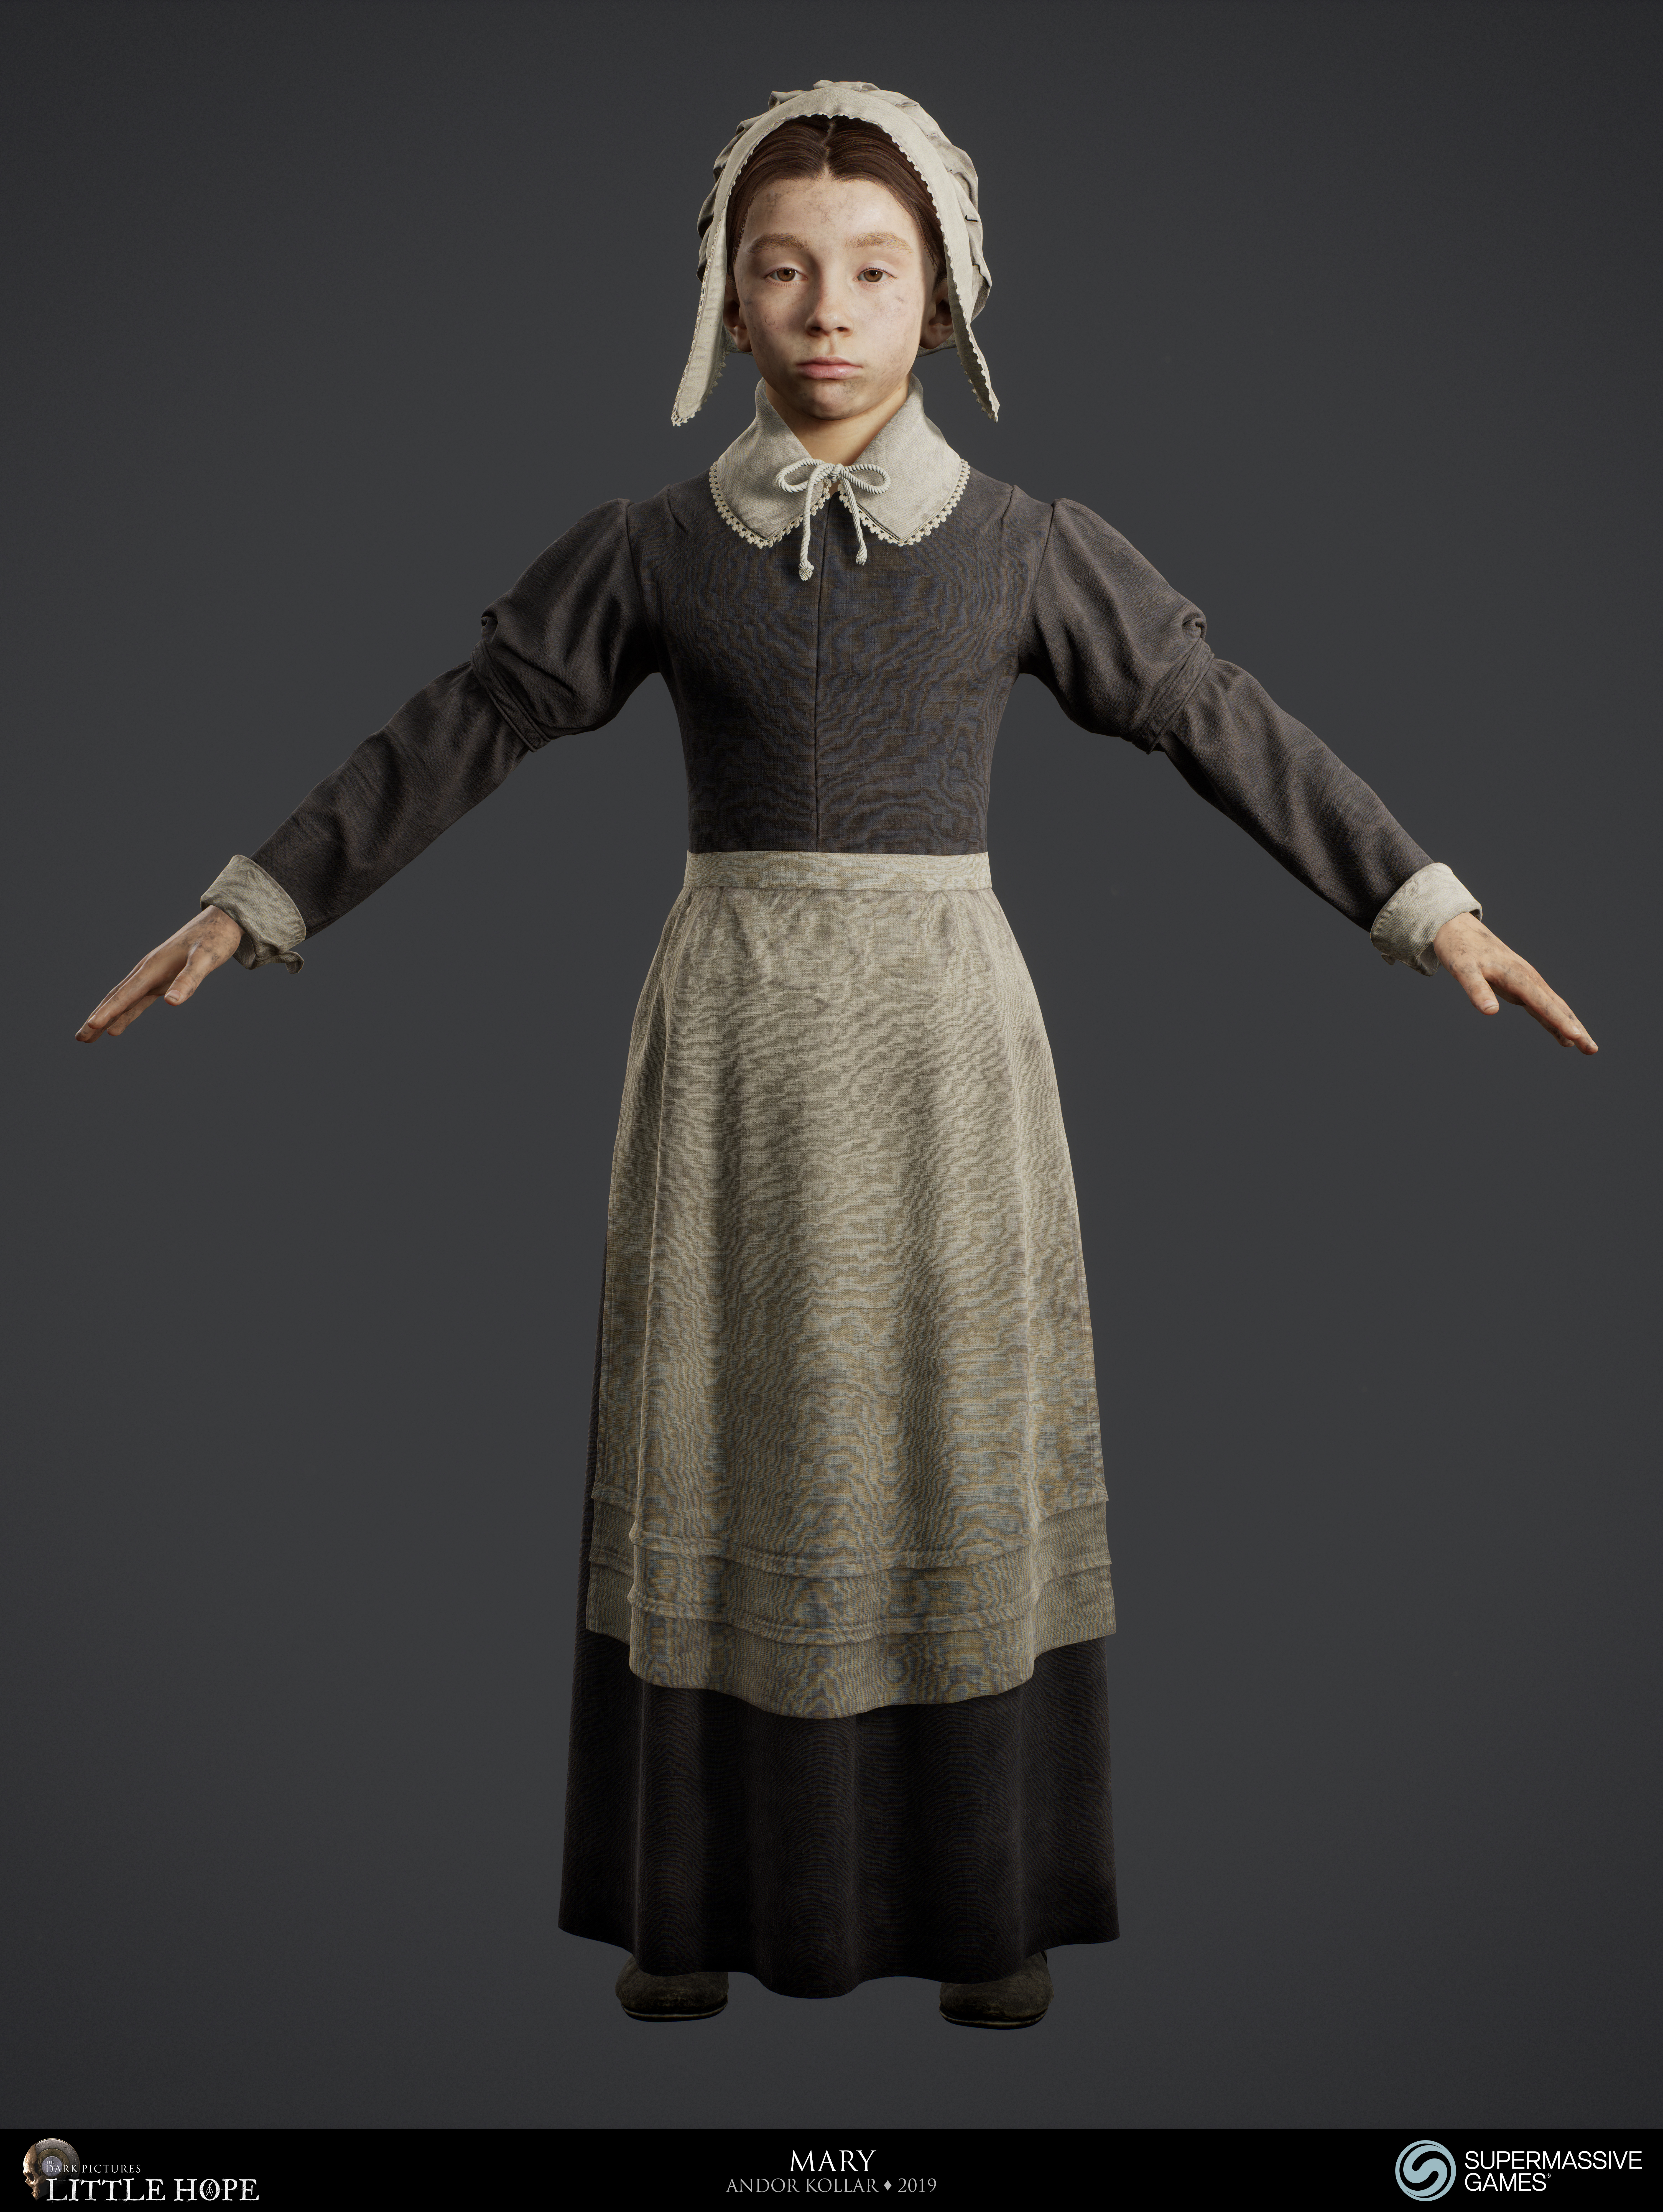 Little Hope, 3d game character, Mary, little girl with 17th century dress, bonnet, skirt, Unreal Engine, Andor Kollar